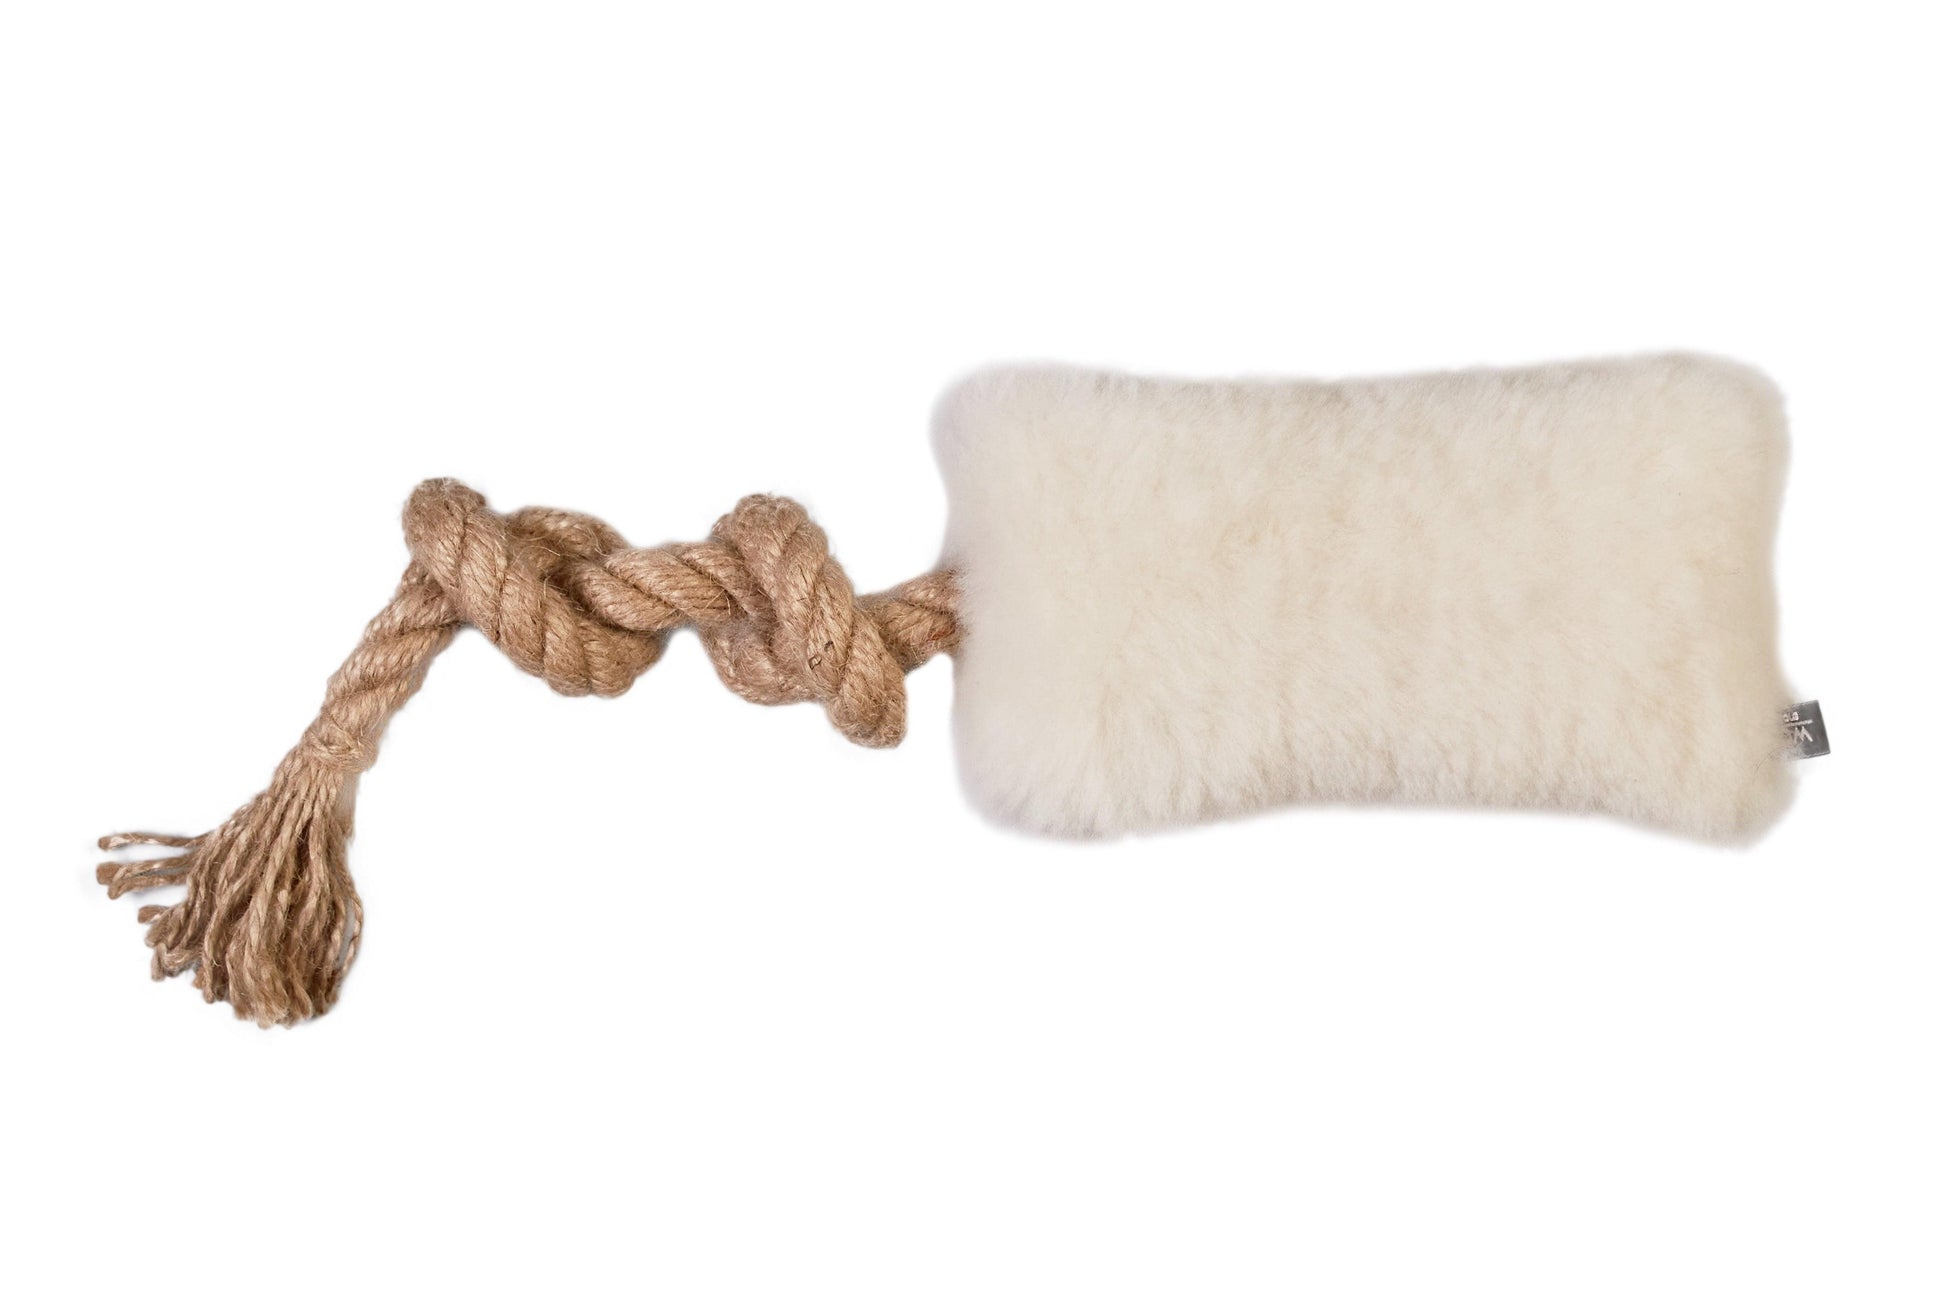 An organic Natural Sheepskin Dog Tug Toy with a rope attached to it, great for eco-friendly pet products from Mellow Pet Store.